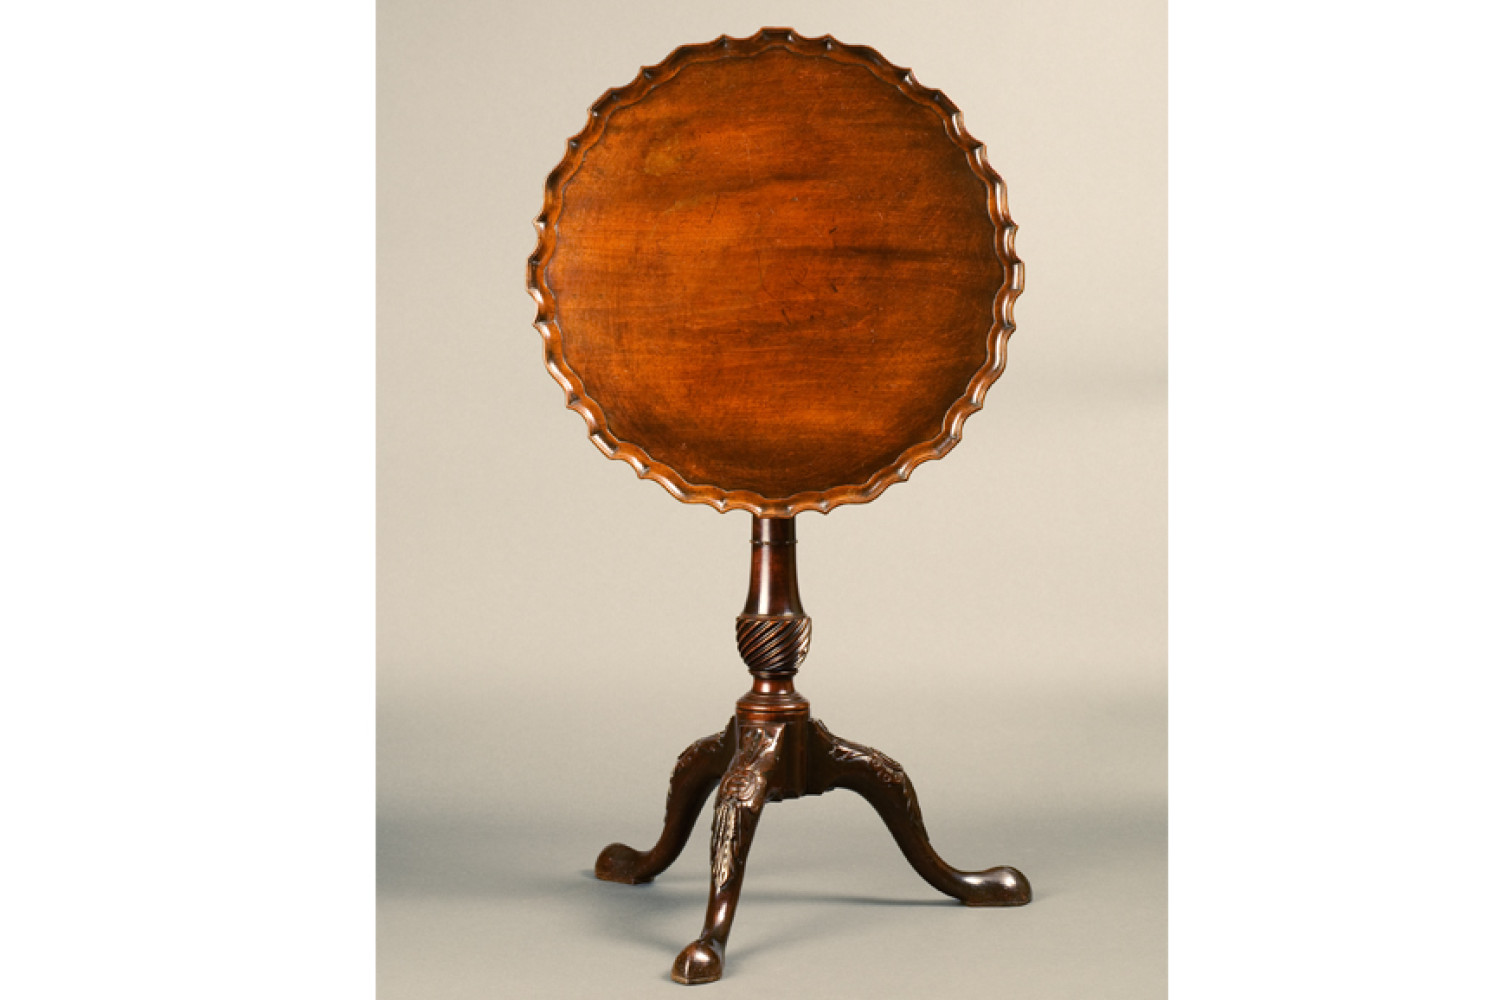 Kettle Stand, ca. 1750-60, Charleston, South Carolina; mahogany; 27 5/8 x 21 inches (diameter); Courtesy of The Rivers Collection
